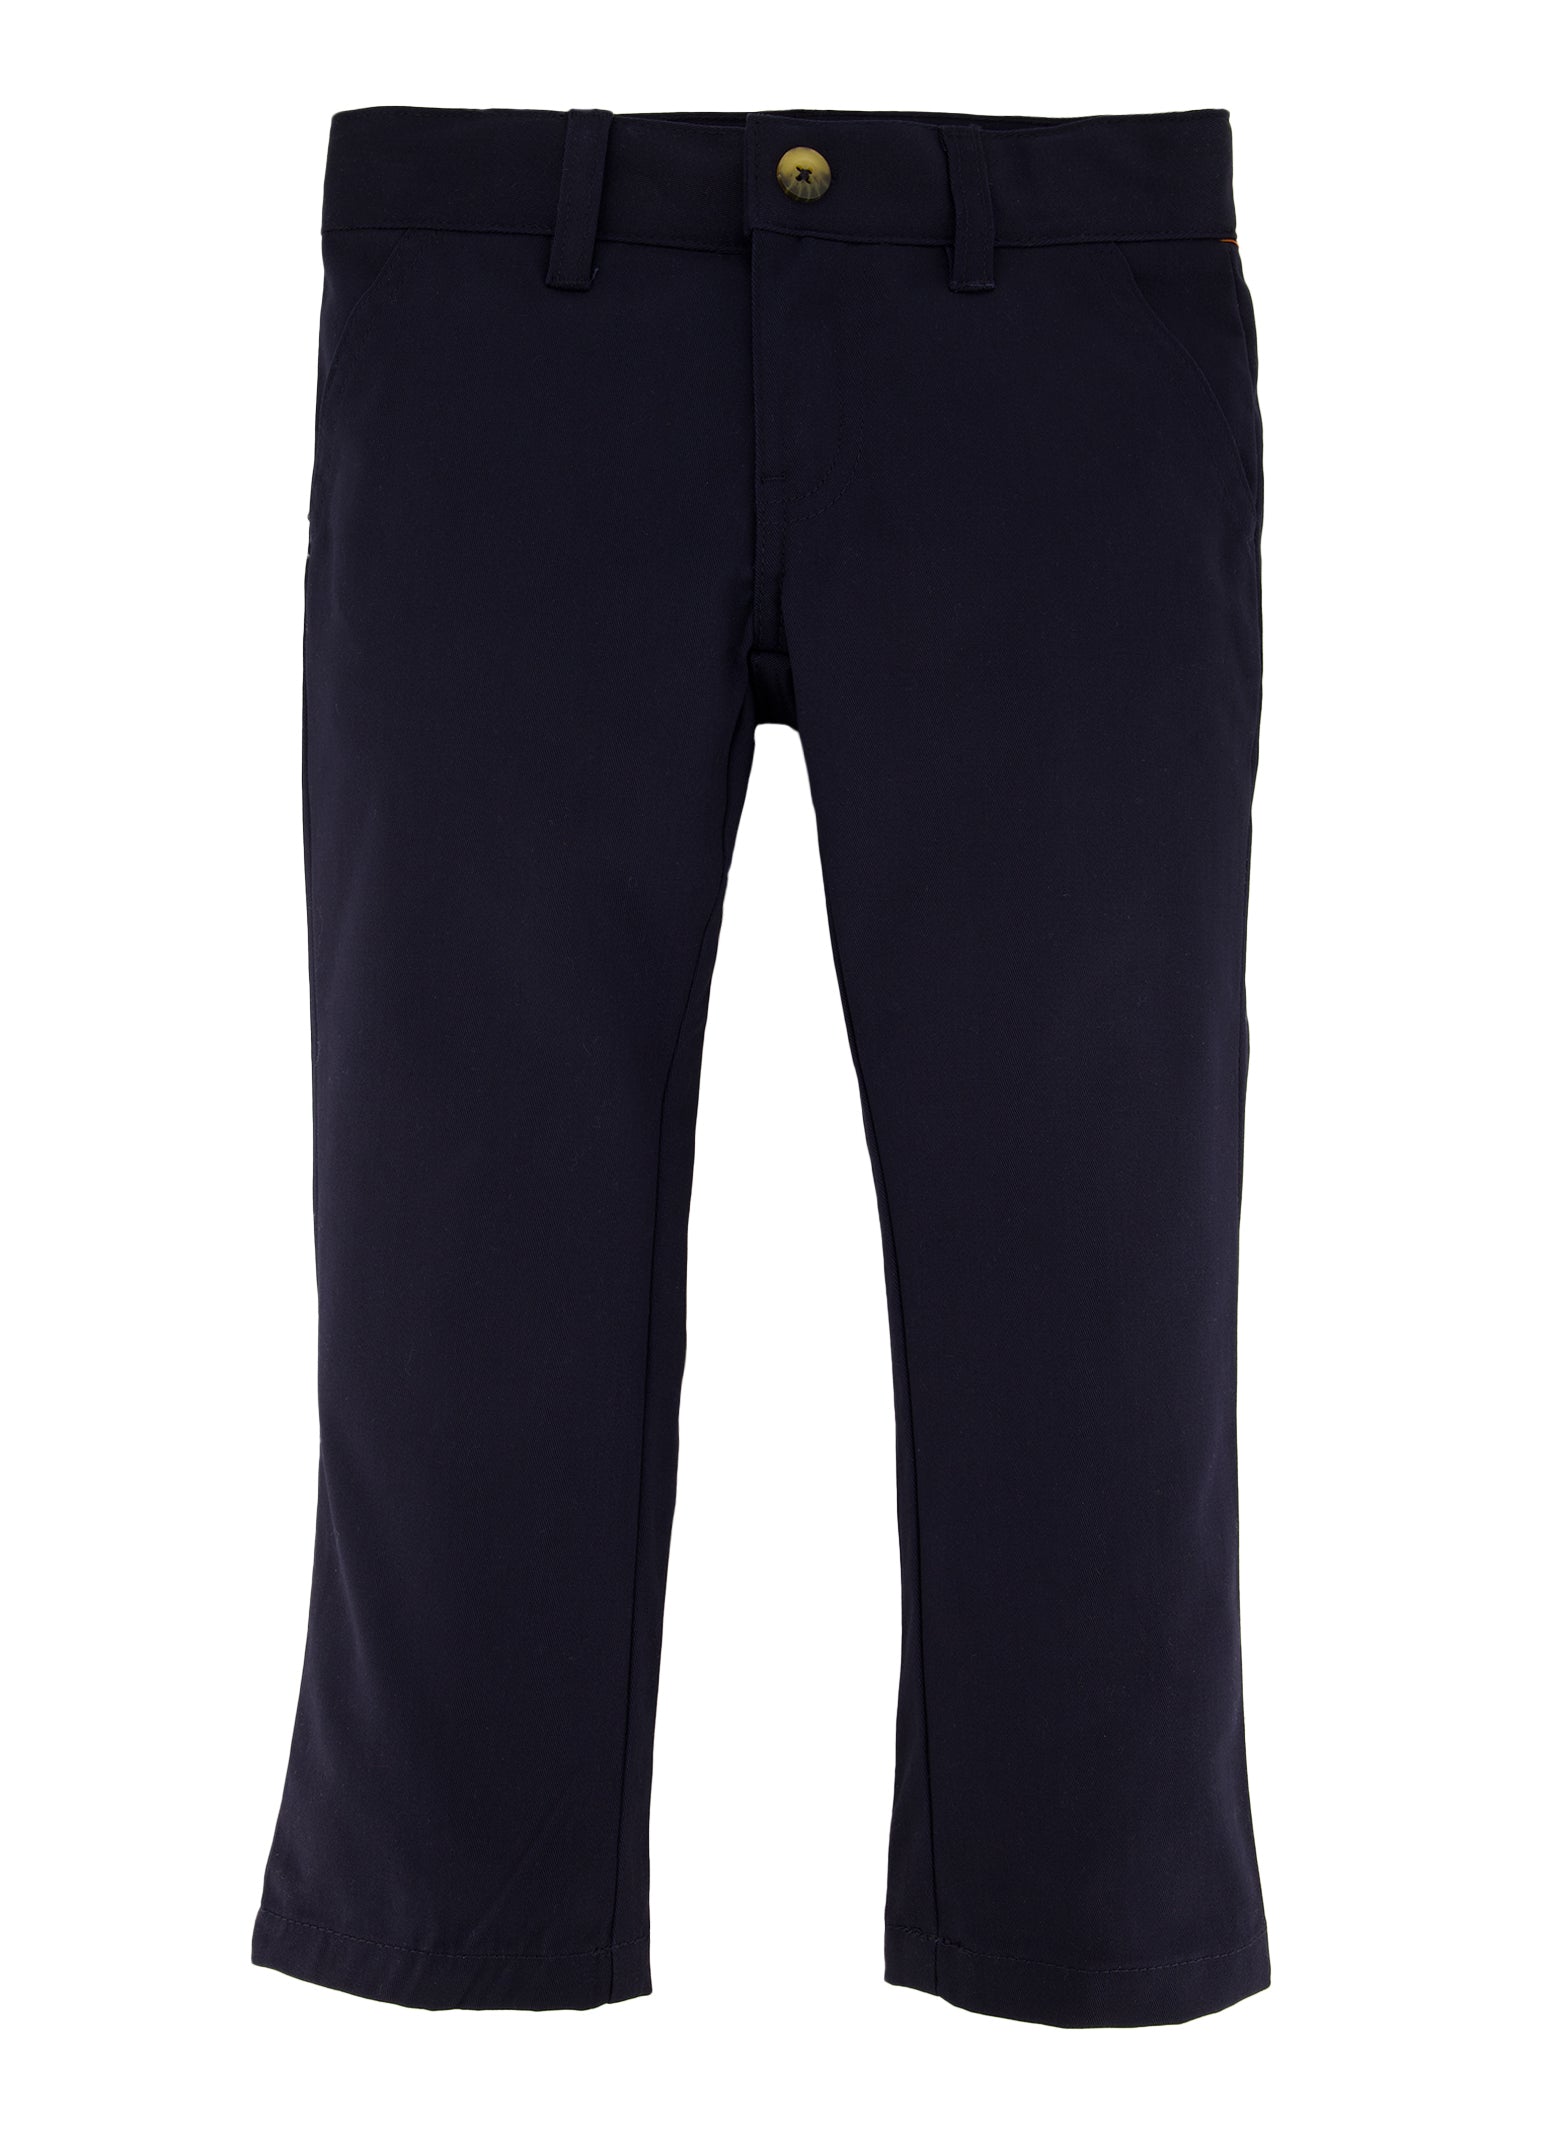 French Toast Boys 4-7 Straight Fit Chinos, Blue, Size 7